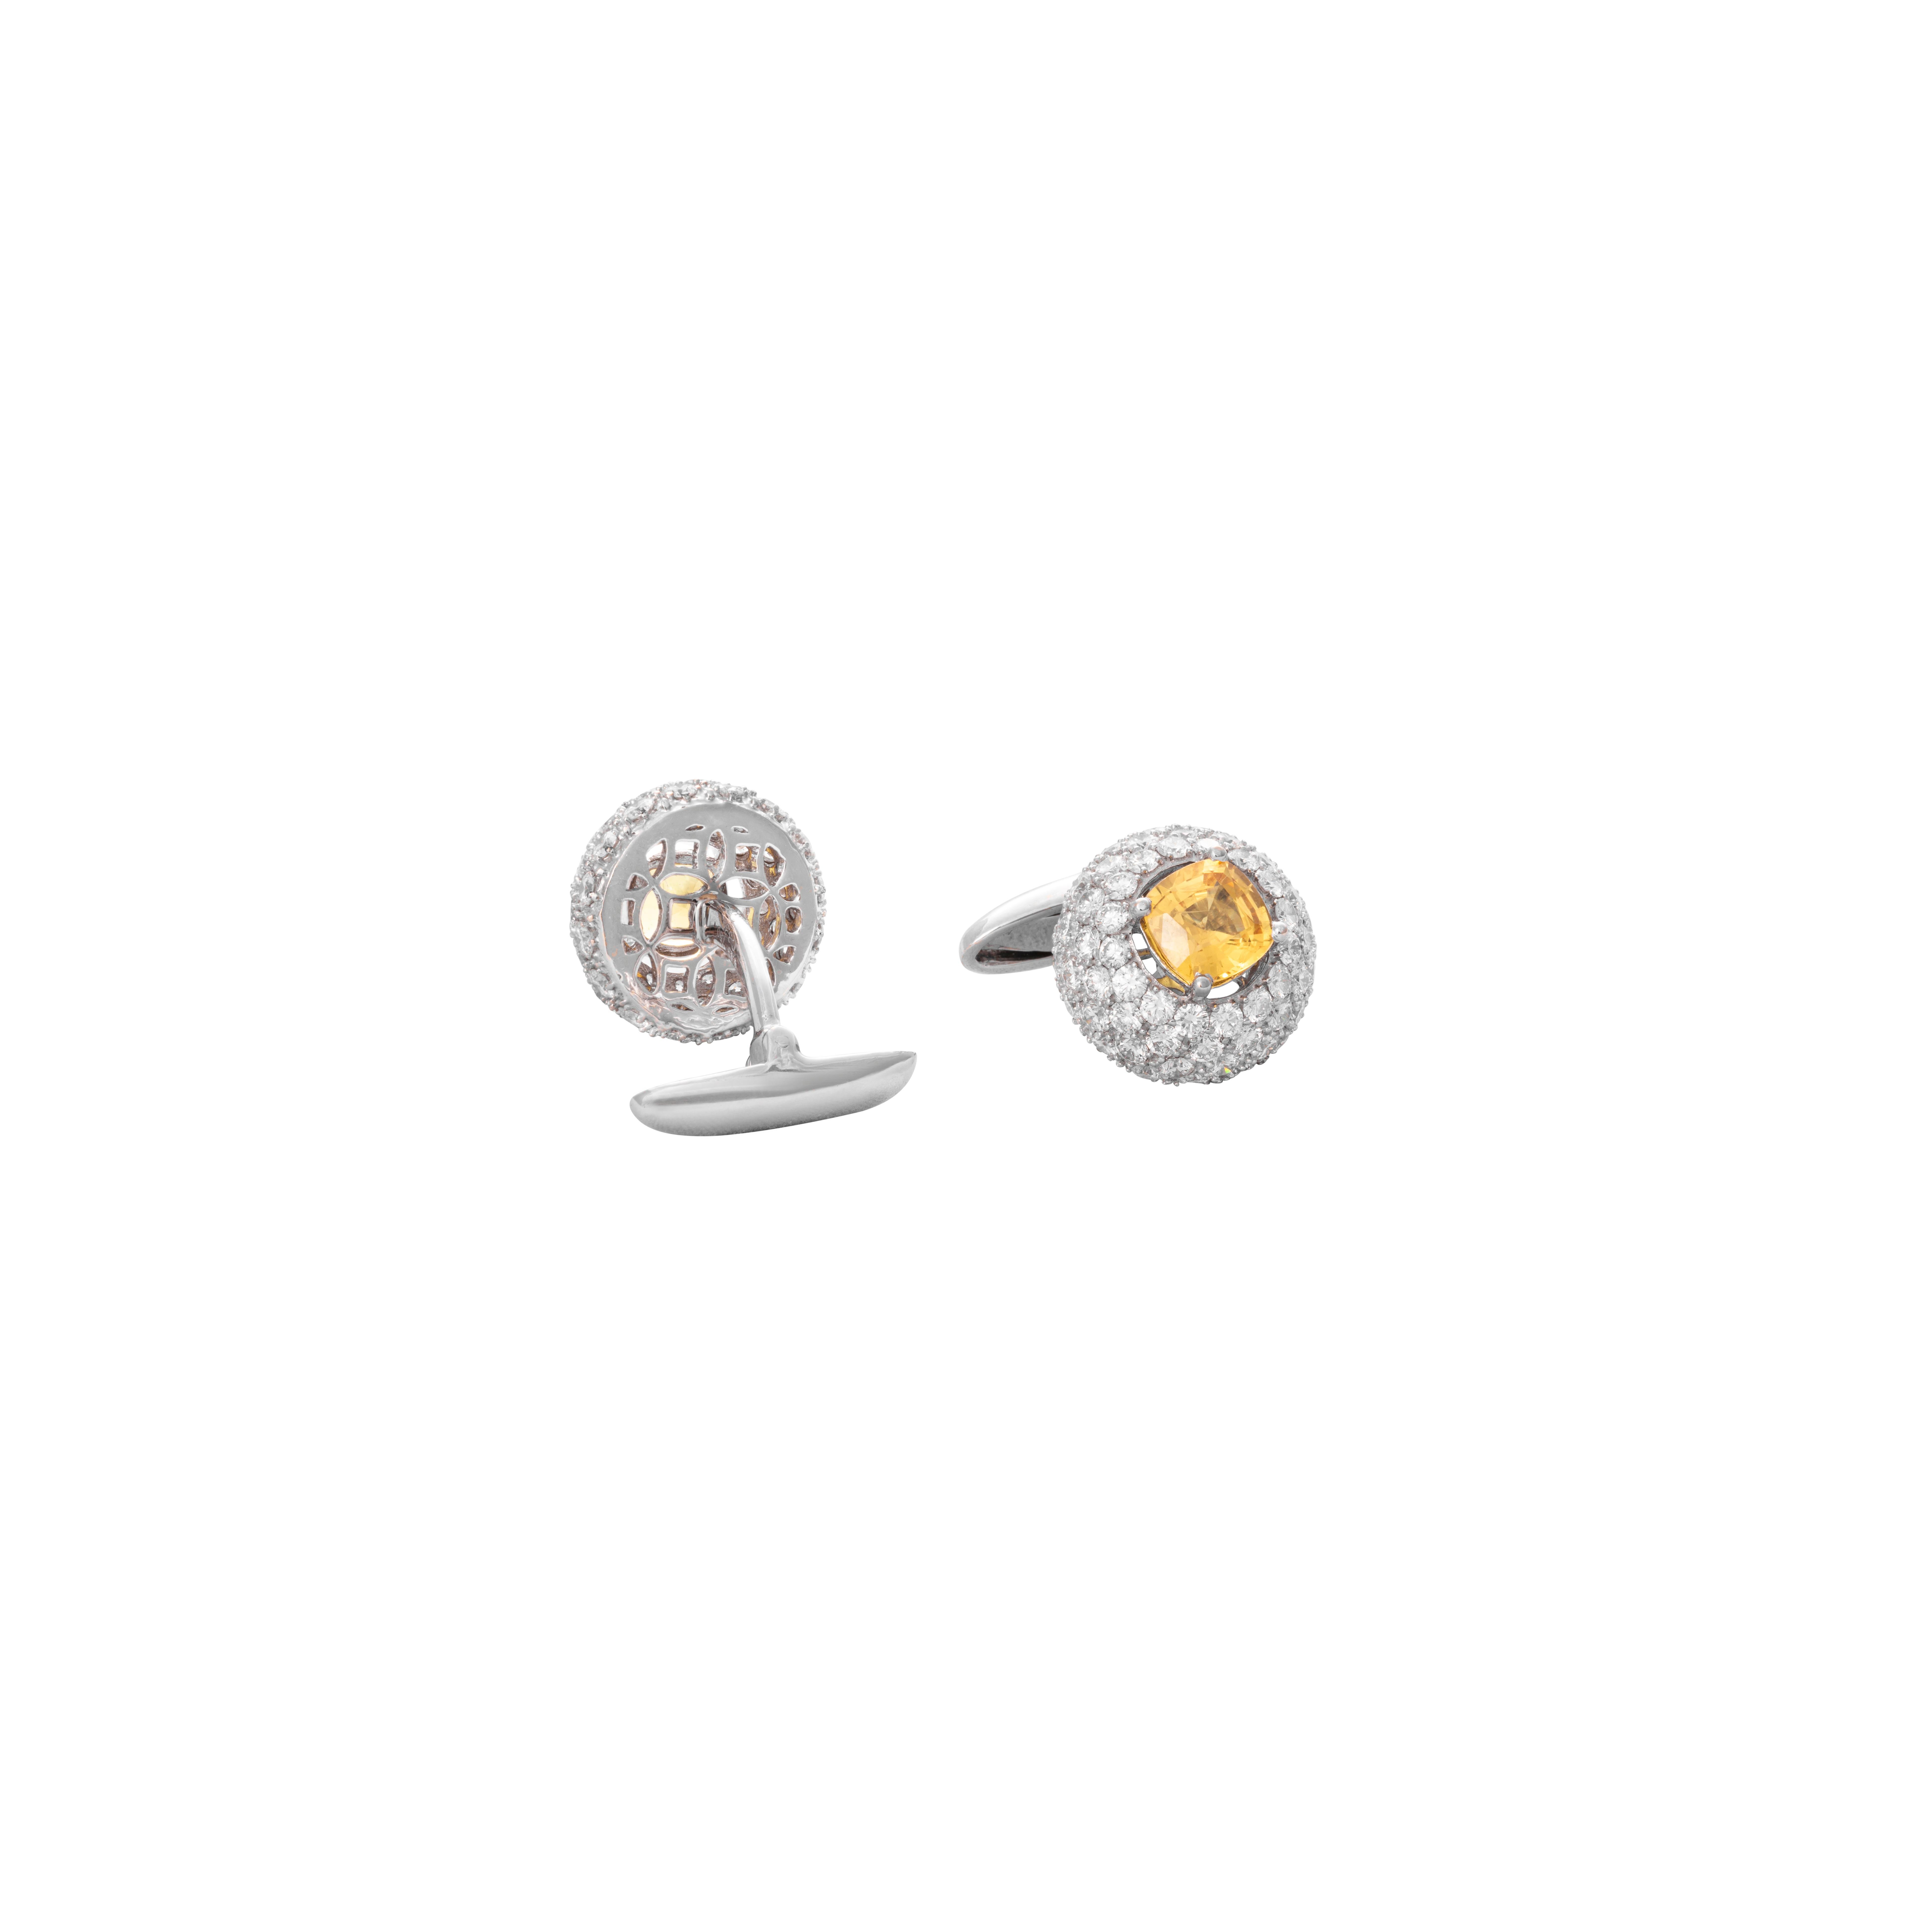 18 Karat White Gold Yellow Sapphire Diamond Cufflinks

Set in 18 Karat white gold these classy & modern cufflinks crafted for the discerning gentleman are studded with gorgeous yellow sapphires and accentuated by white diamonds.

18 Karat Gold -